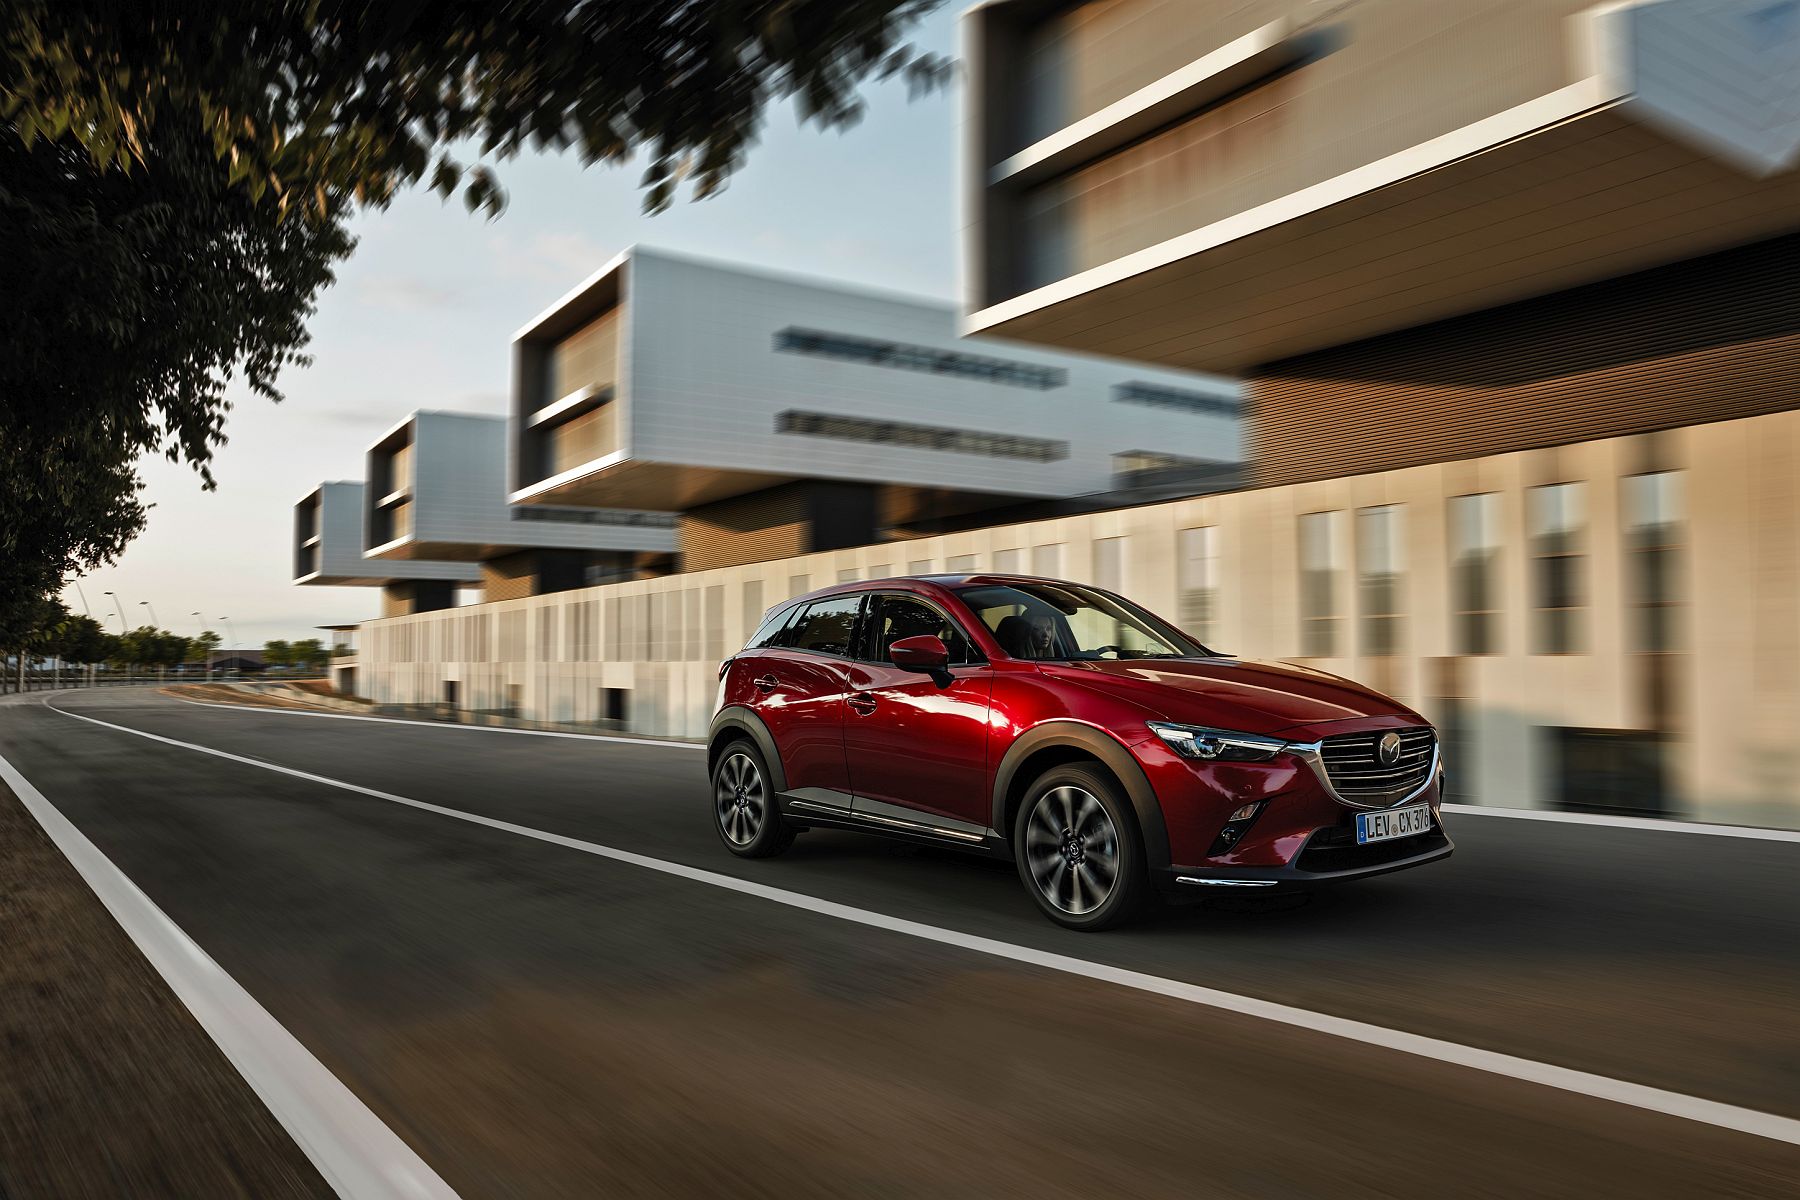 05_2018_MAZDA_CX-3_ACTION_FRONT